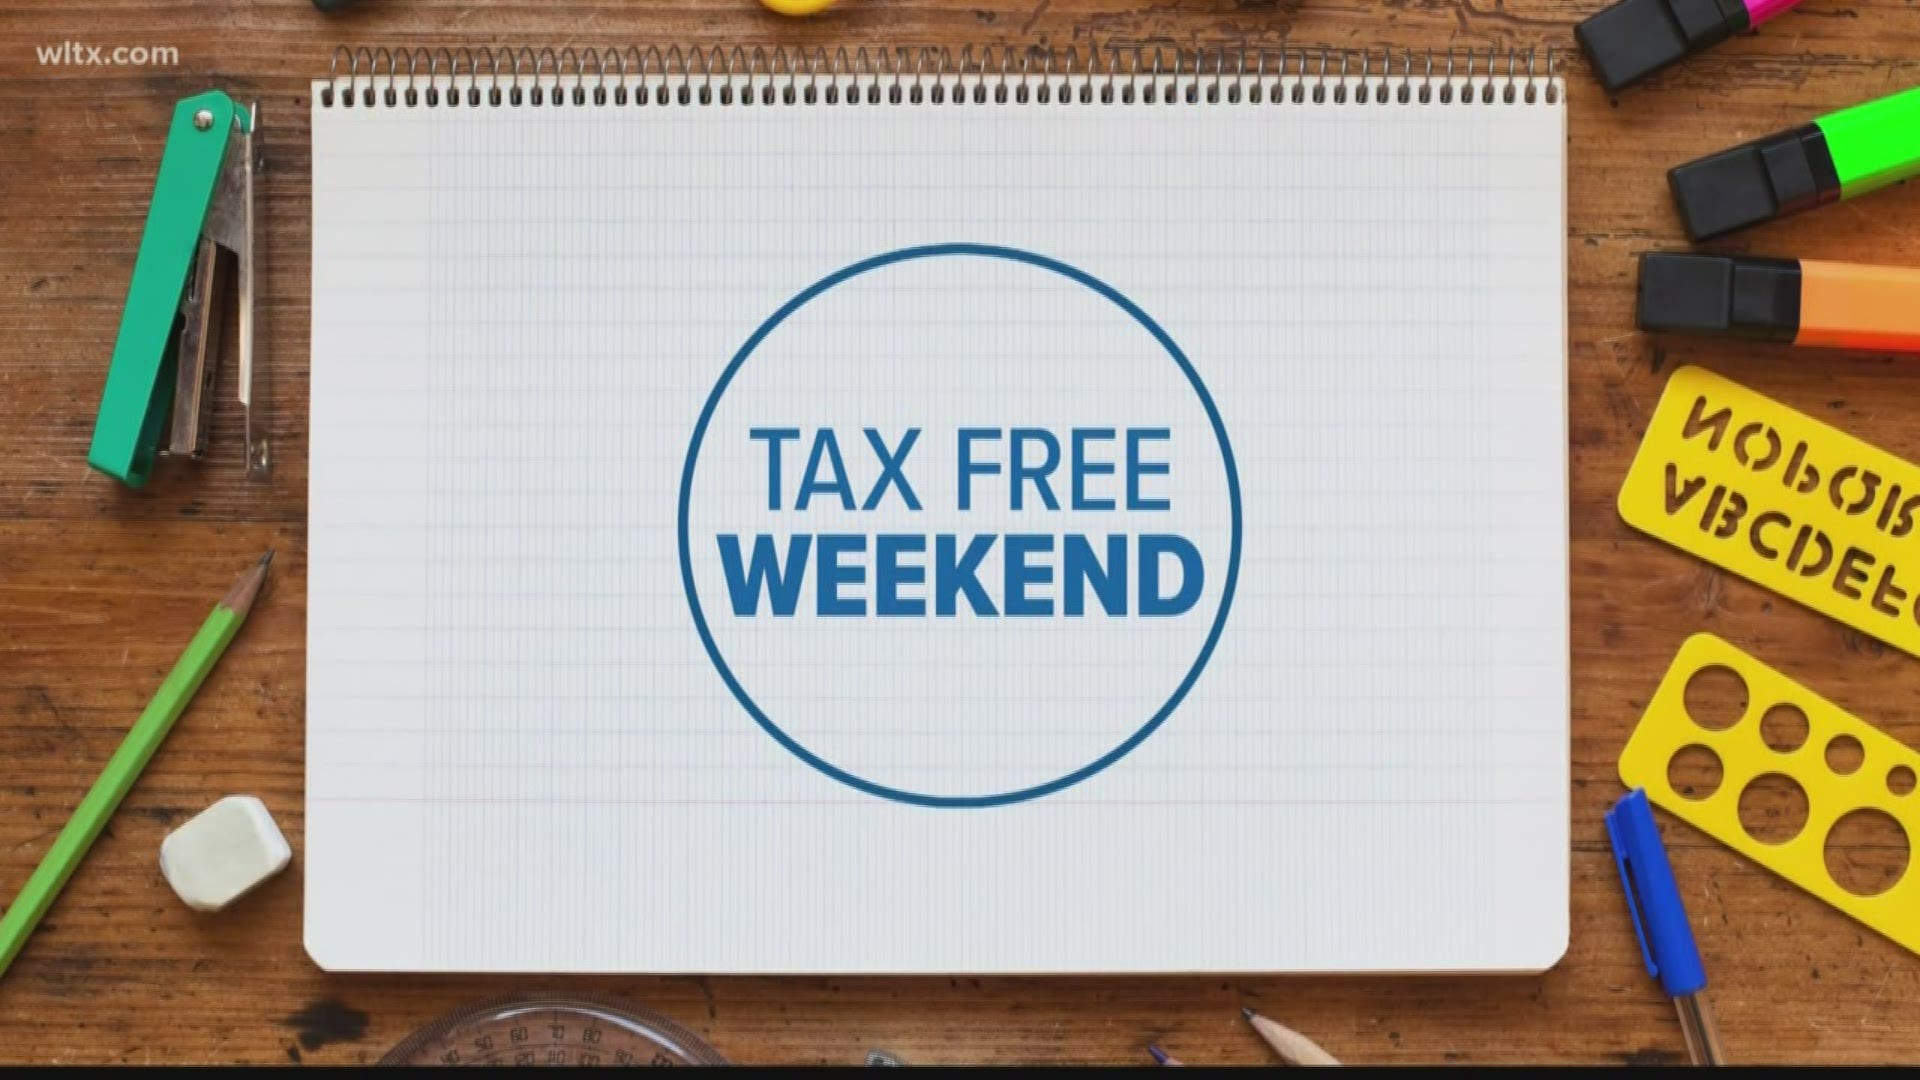 What is tax free during SC's Tax Free Holiday weekend?